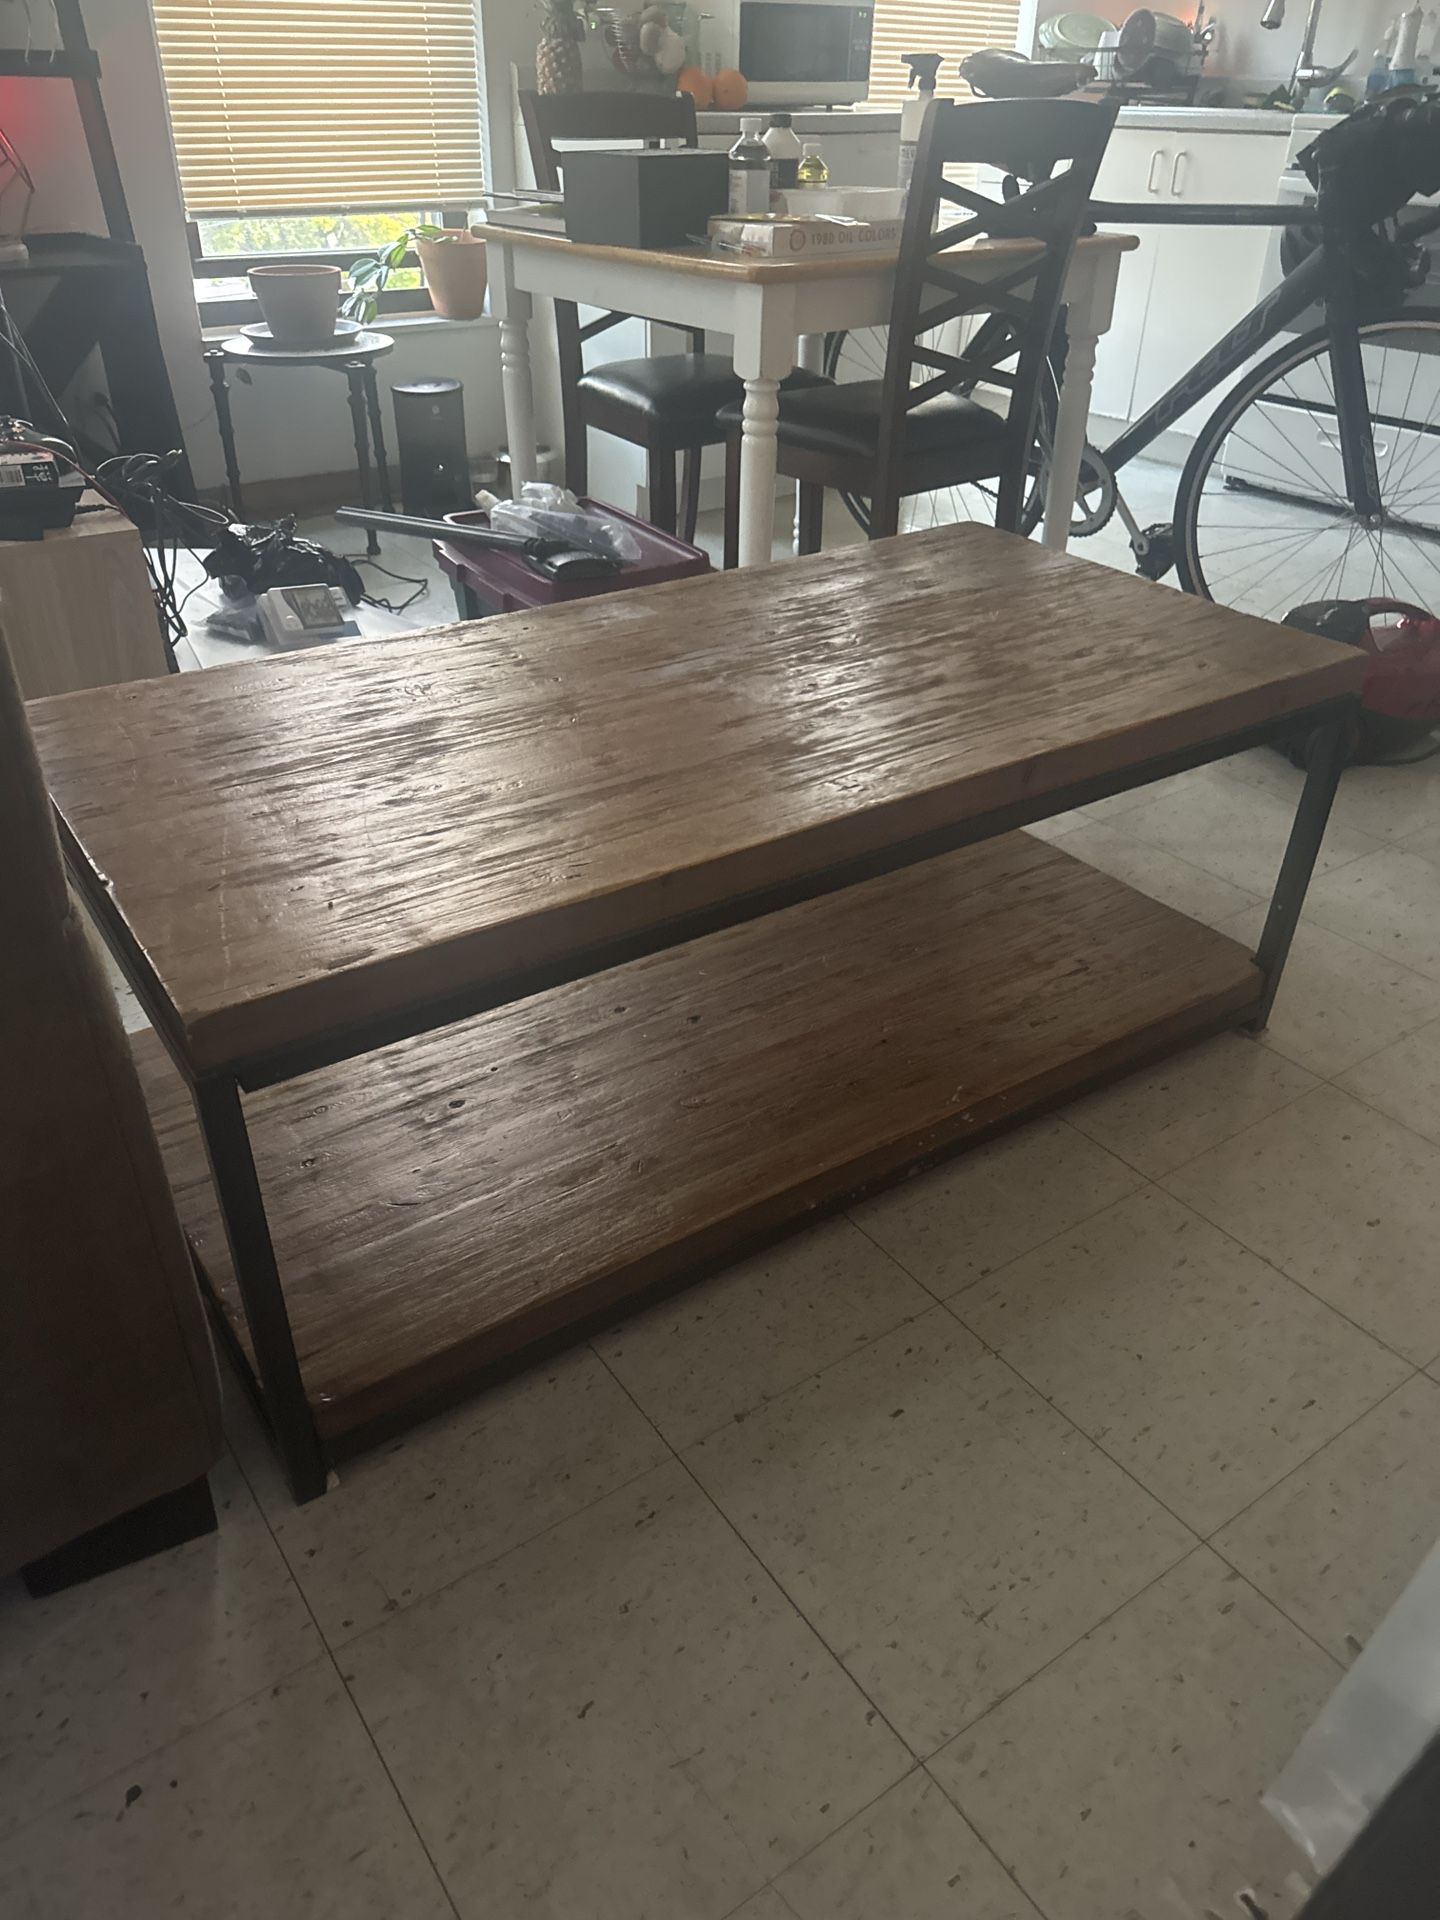 Free Sturdy Wooden Coffee Table